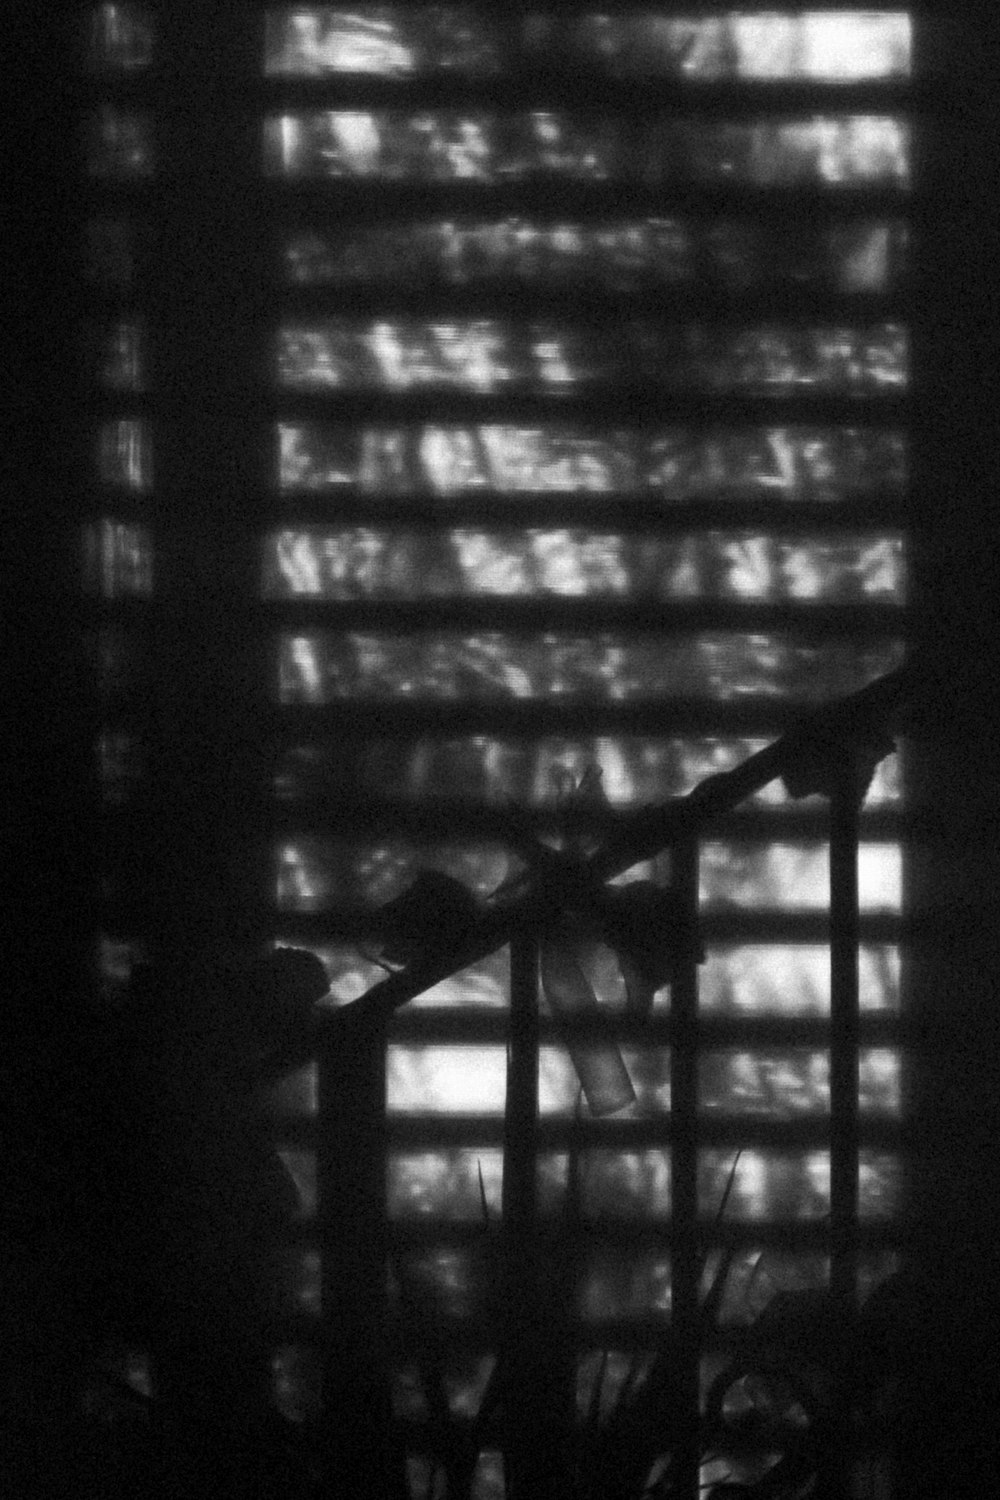 black metal window grill in grayscale photography